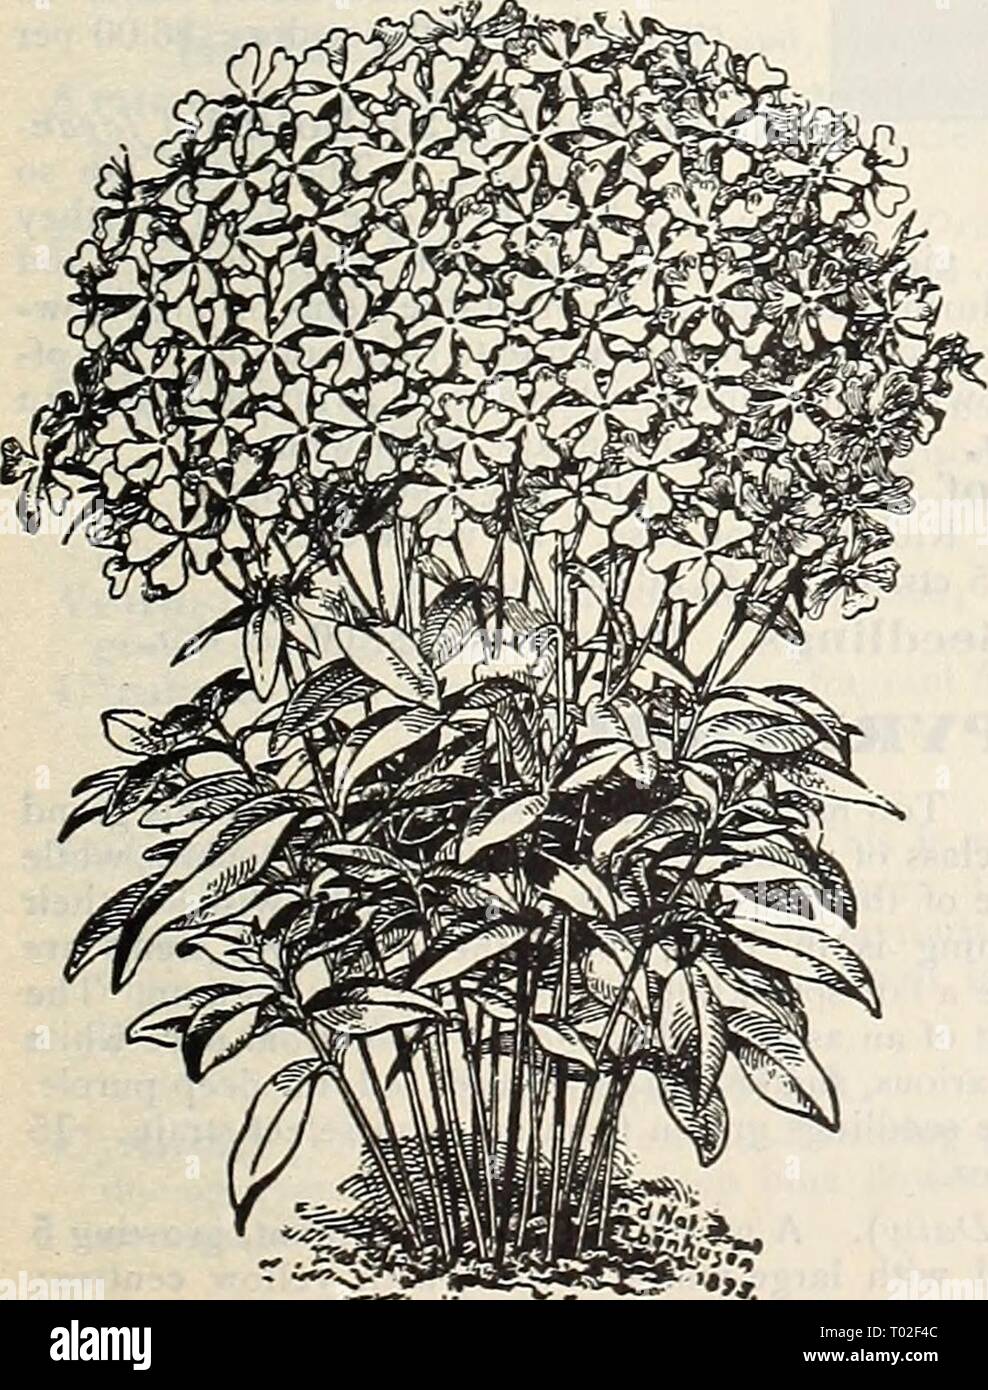 Dreer's garden calendar : 1900 . dreersgardencale1900henr Year: 1900  Phlox Subulata.    Phlox Divakicata Canadensis. Hardy Perennial Phlox. PHI^OX. Divaricata Canadensis. One of our native varieties that is but rarely met with, and which has been introduced in Europe the past few years as a novelty. A plant that is certain to meet with much favor when better known, as nothing can produce such a cheerful corner in the garden in the very early spring; frequently beginning to bloom early in April, it continues until about the middle of June, with large bright lilac-colored flowers, which are pro Stock Photo